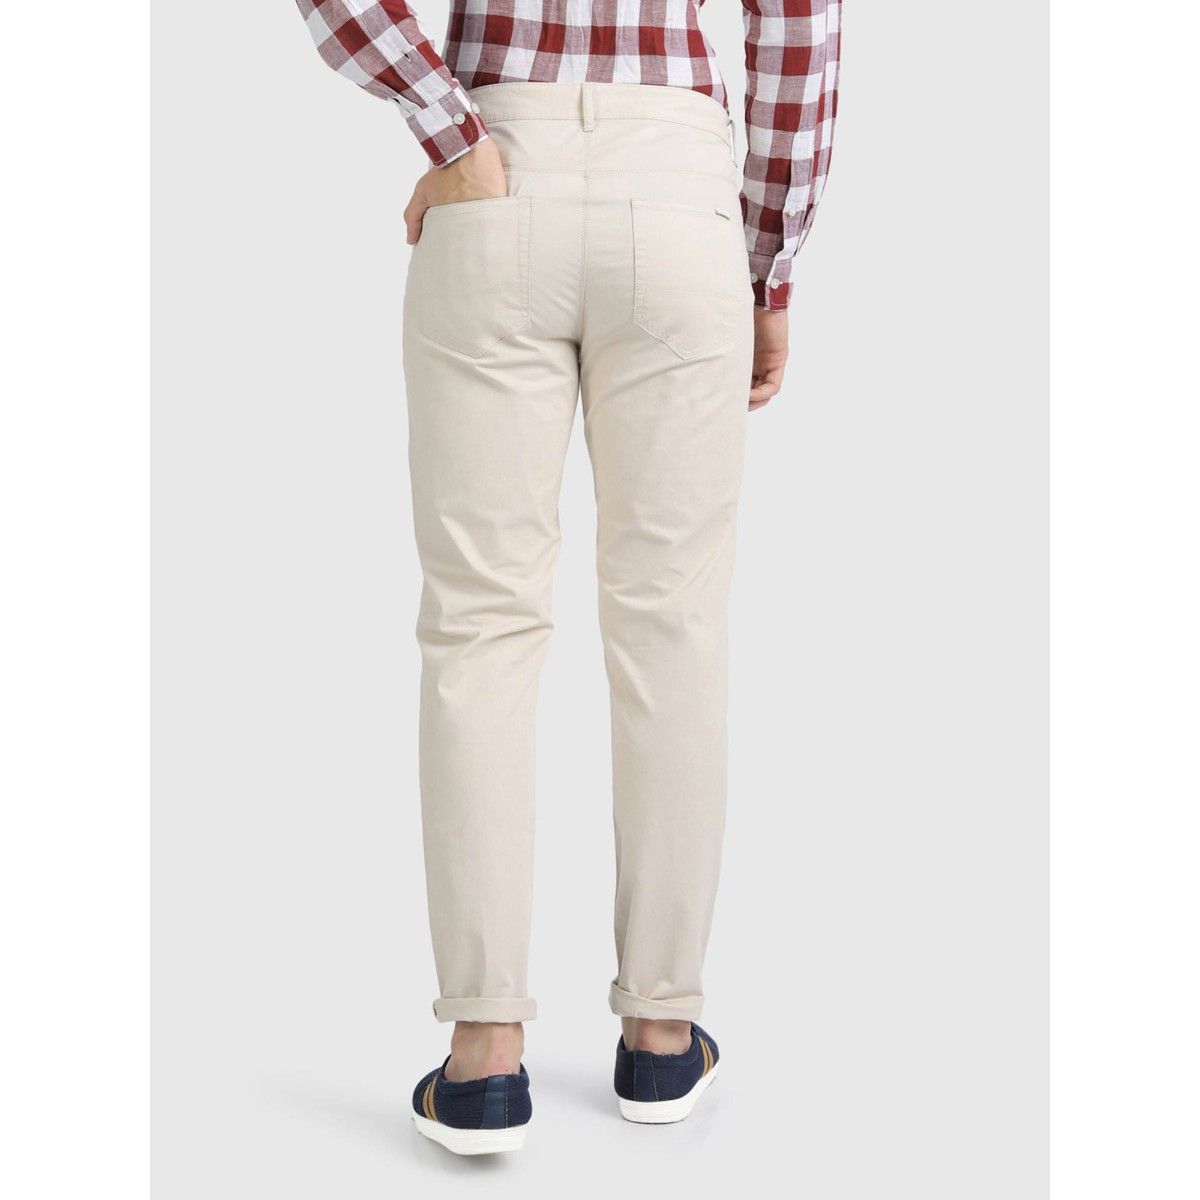 United Colors of Benetton Boys Trousers  Price History